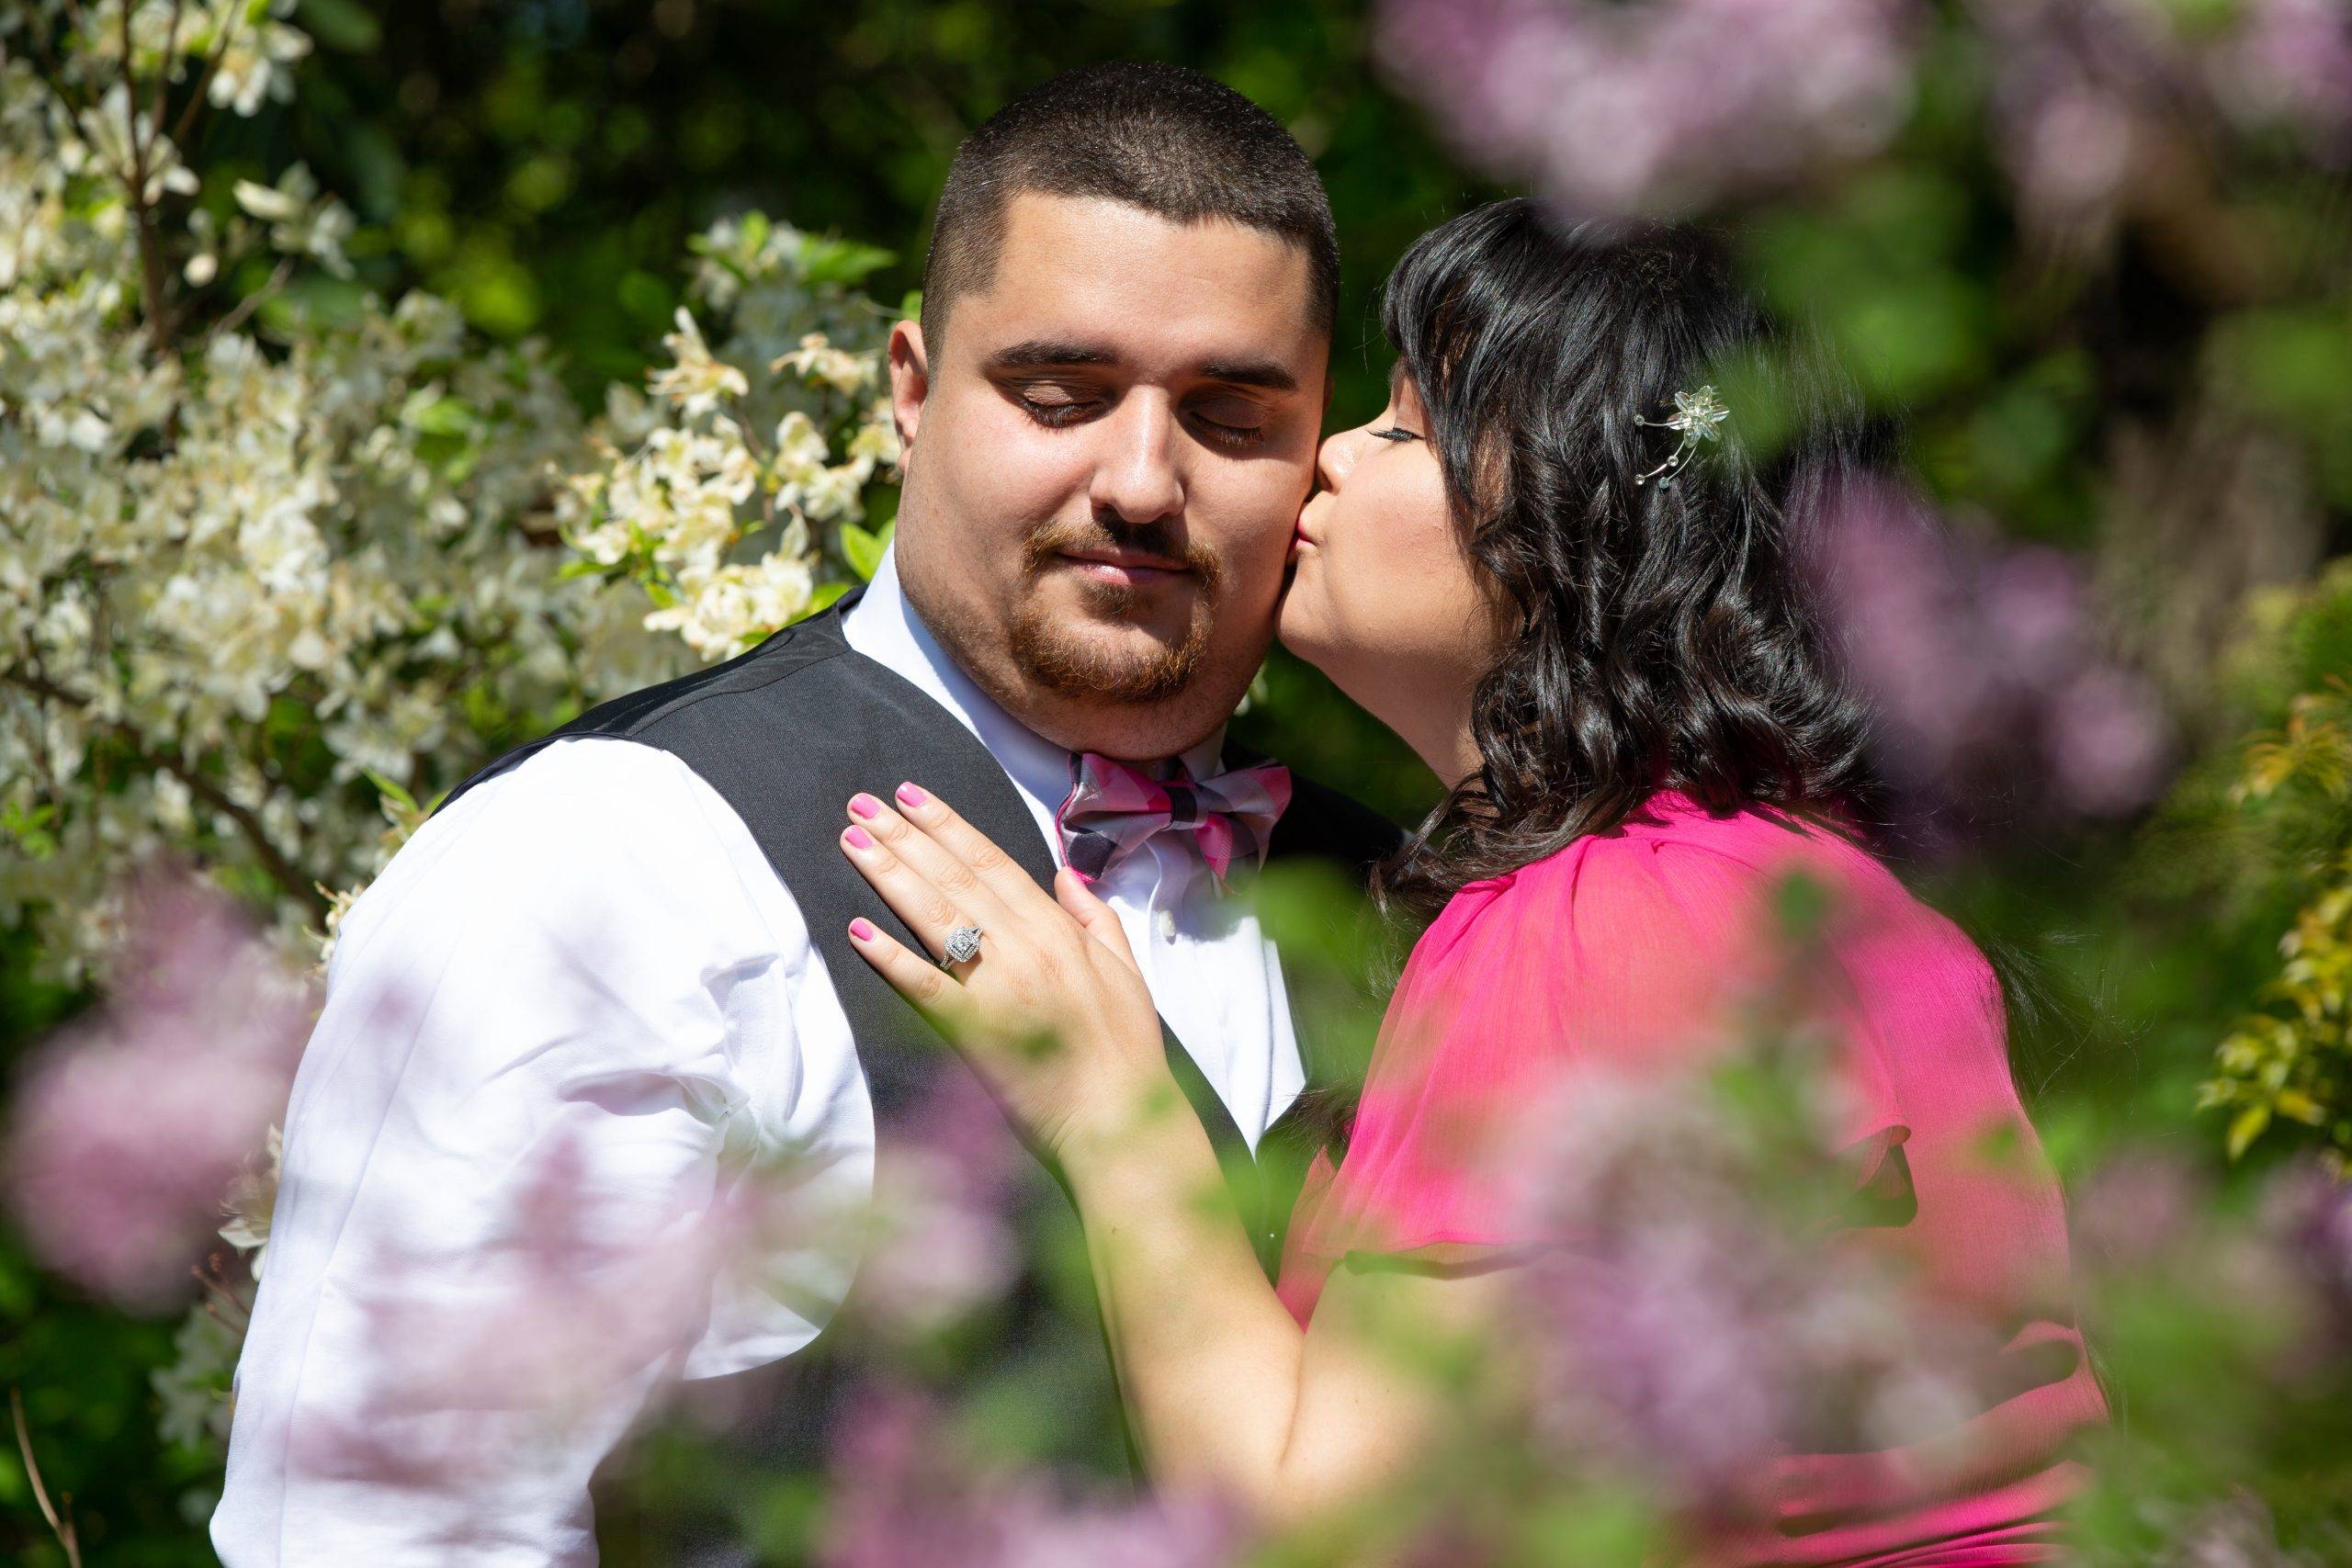 A man and woman kissing in front of lilacs.